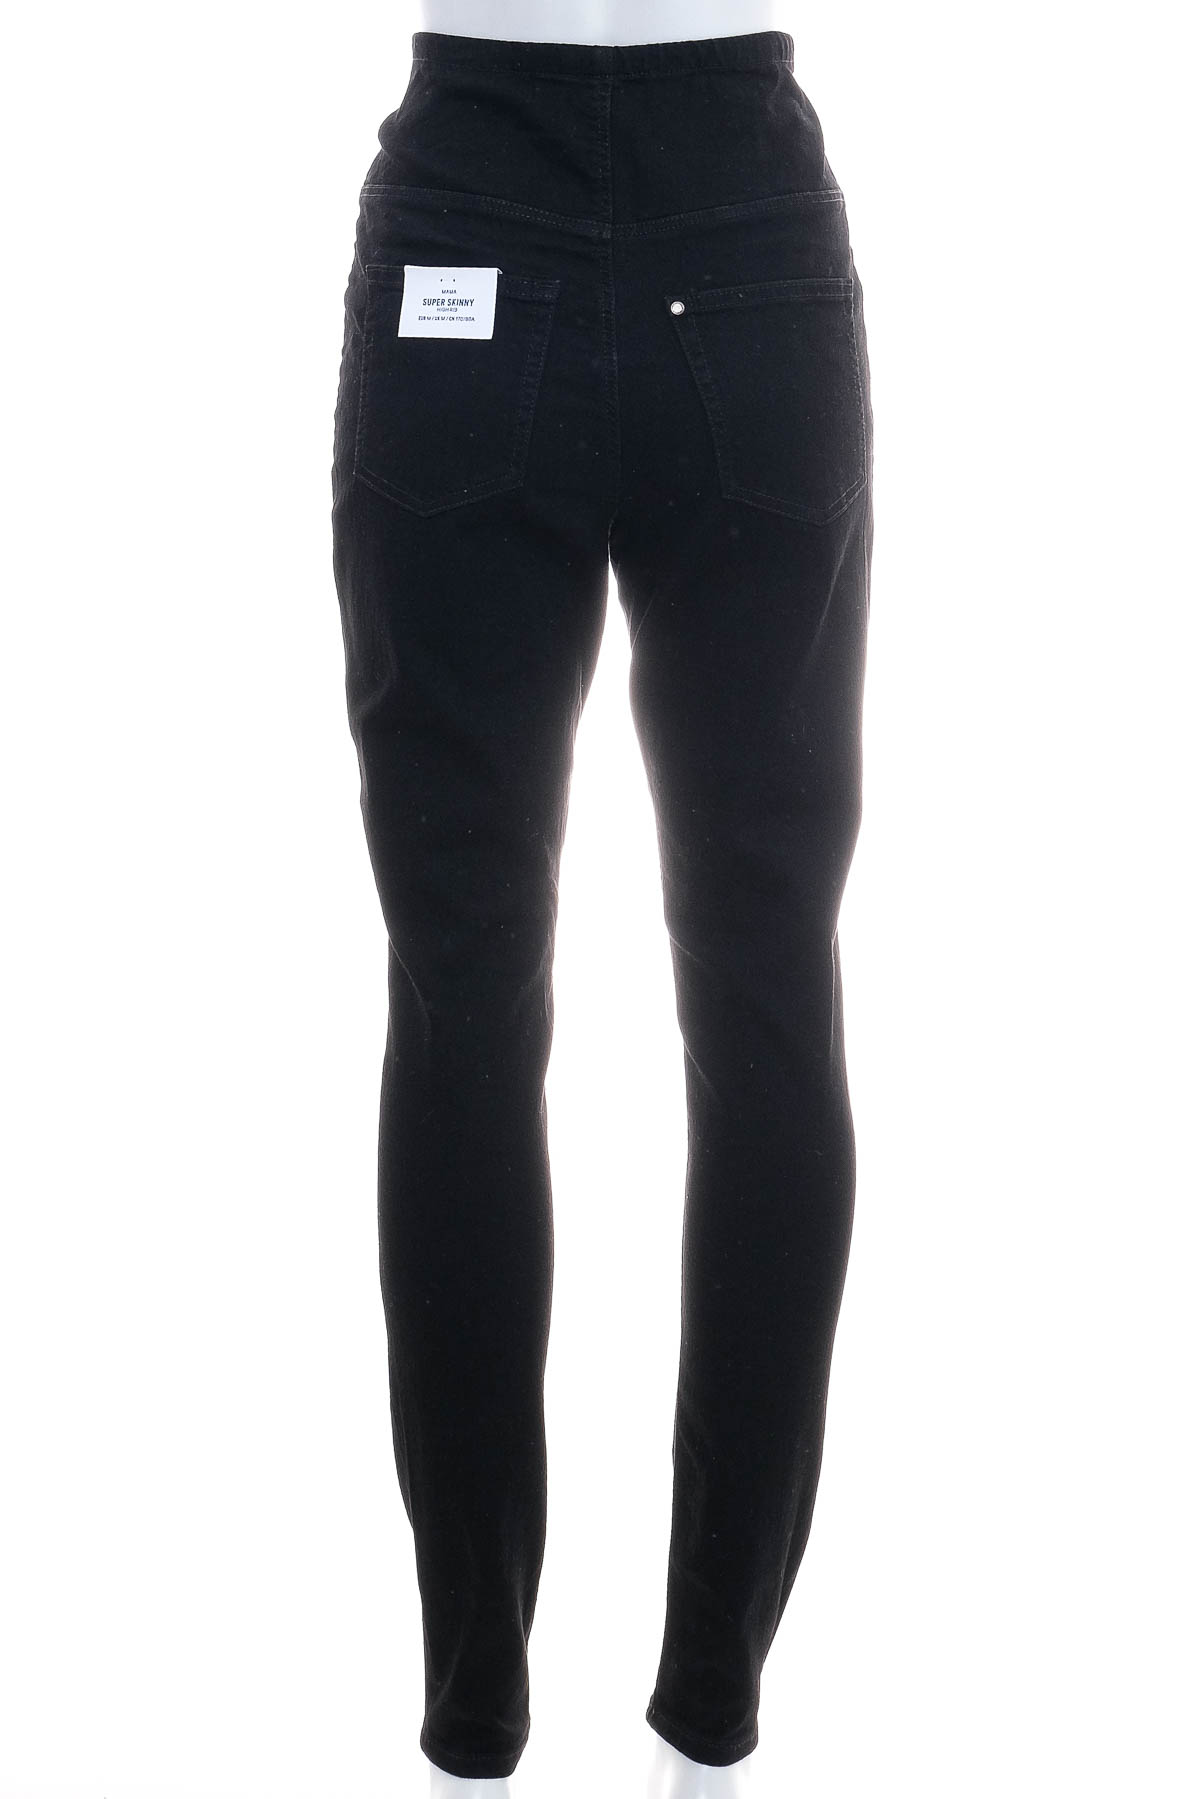 Women's jeans for pregnant women - H&M MAMA - 1